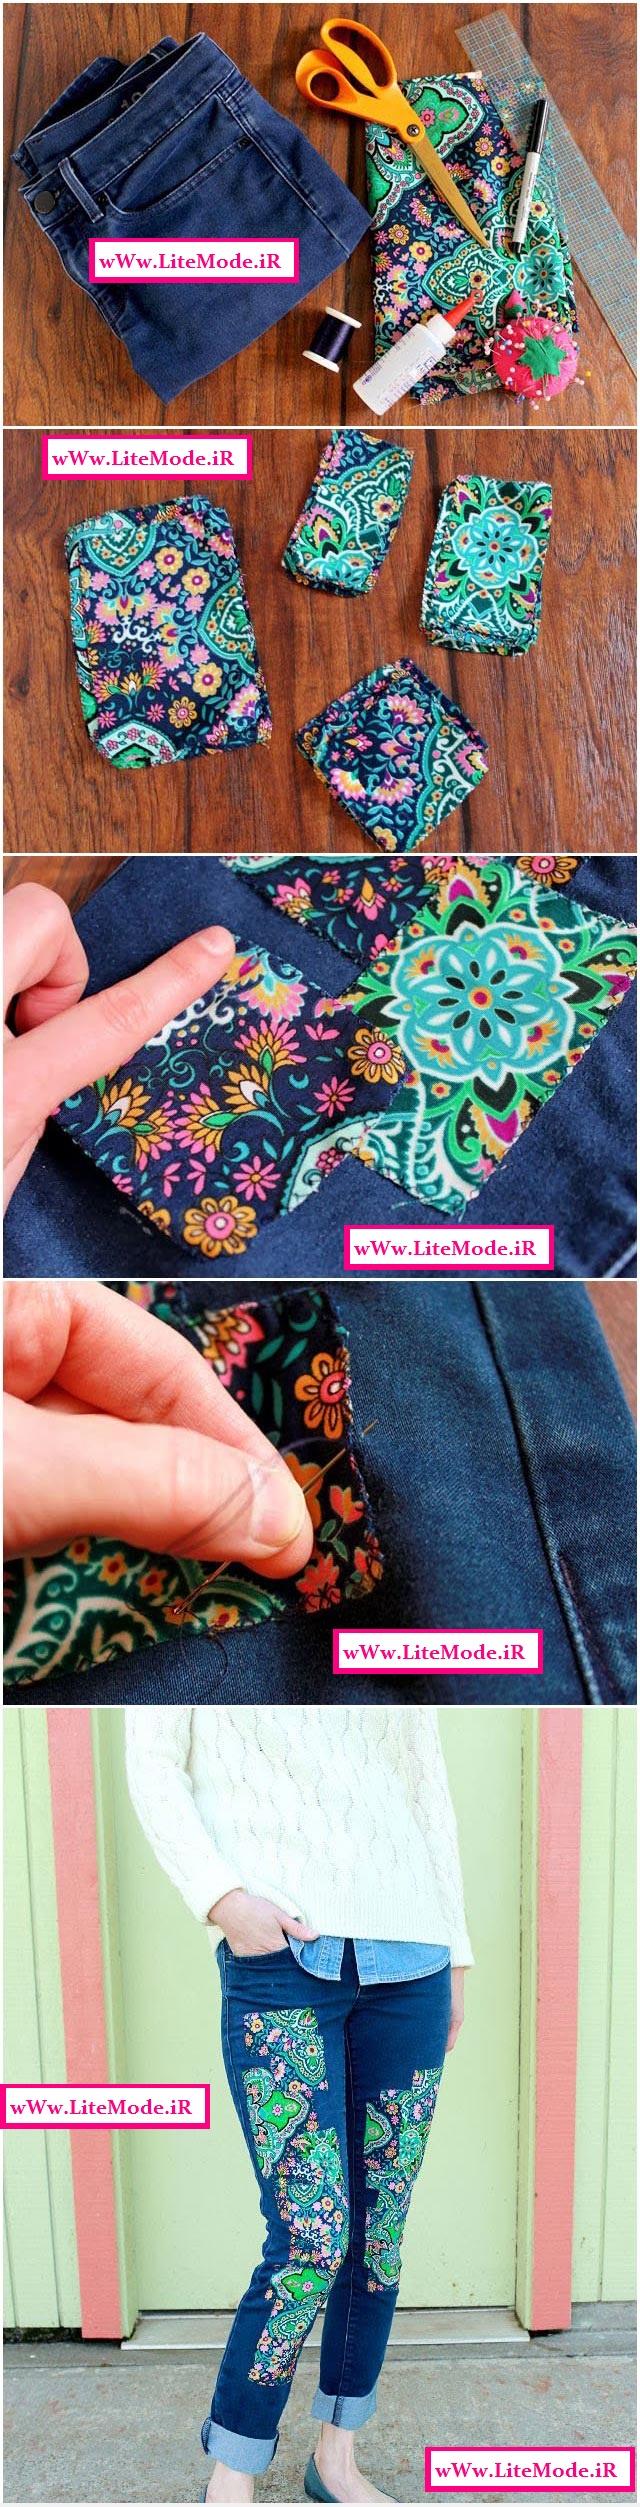  Learning to decorate clothing, apparel decorating video tutorial , step by step decorating instruction , teaching art , teaching, crafts , art education sites , sites Craft , decorate dress models , models of women's jeans , women's jeans model 's clutches , clutches , jeans model ,  آموزش تزئین لباس,آموزش تصویری تزئین لباس,آموزش قدم به قدم تزئین,آموزش کار هنری,آموزش کاردستی,سایت آموزشی هنر,سایت کاردستی,مدل تزئین لباس,مدل شلوار جین زنانه,مدل شلوار جین زنانه مجلسی,مدل شلوار لی مجلسی زنانه,مدل طراحی لباس